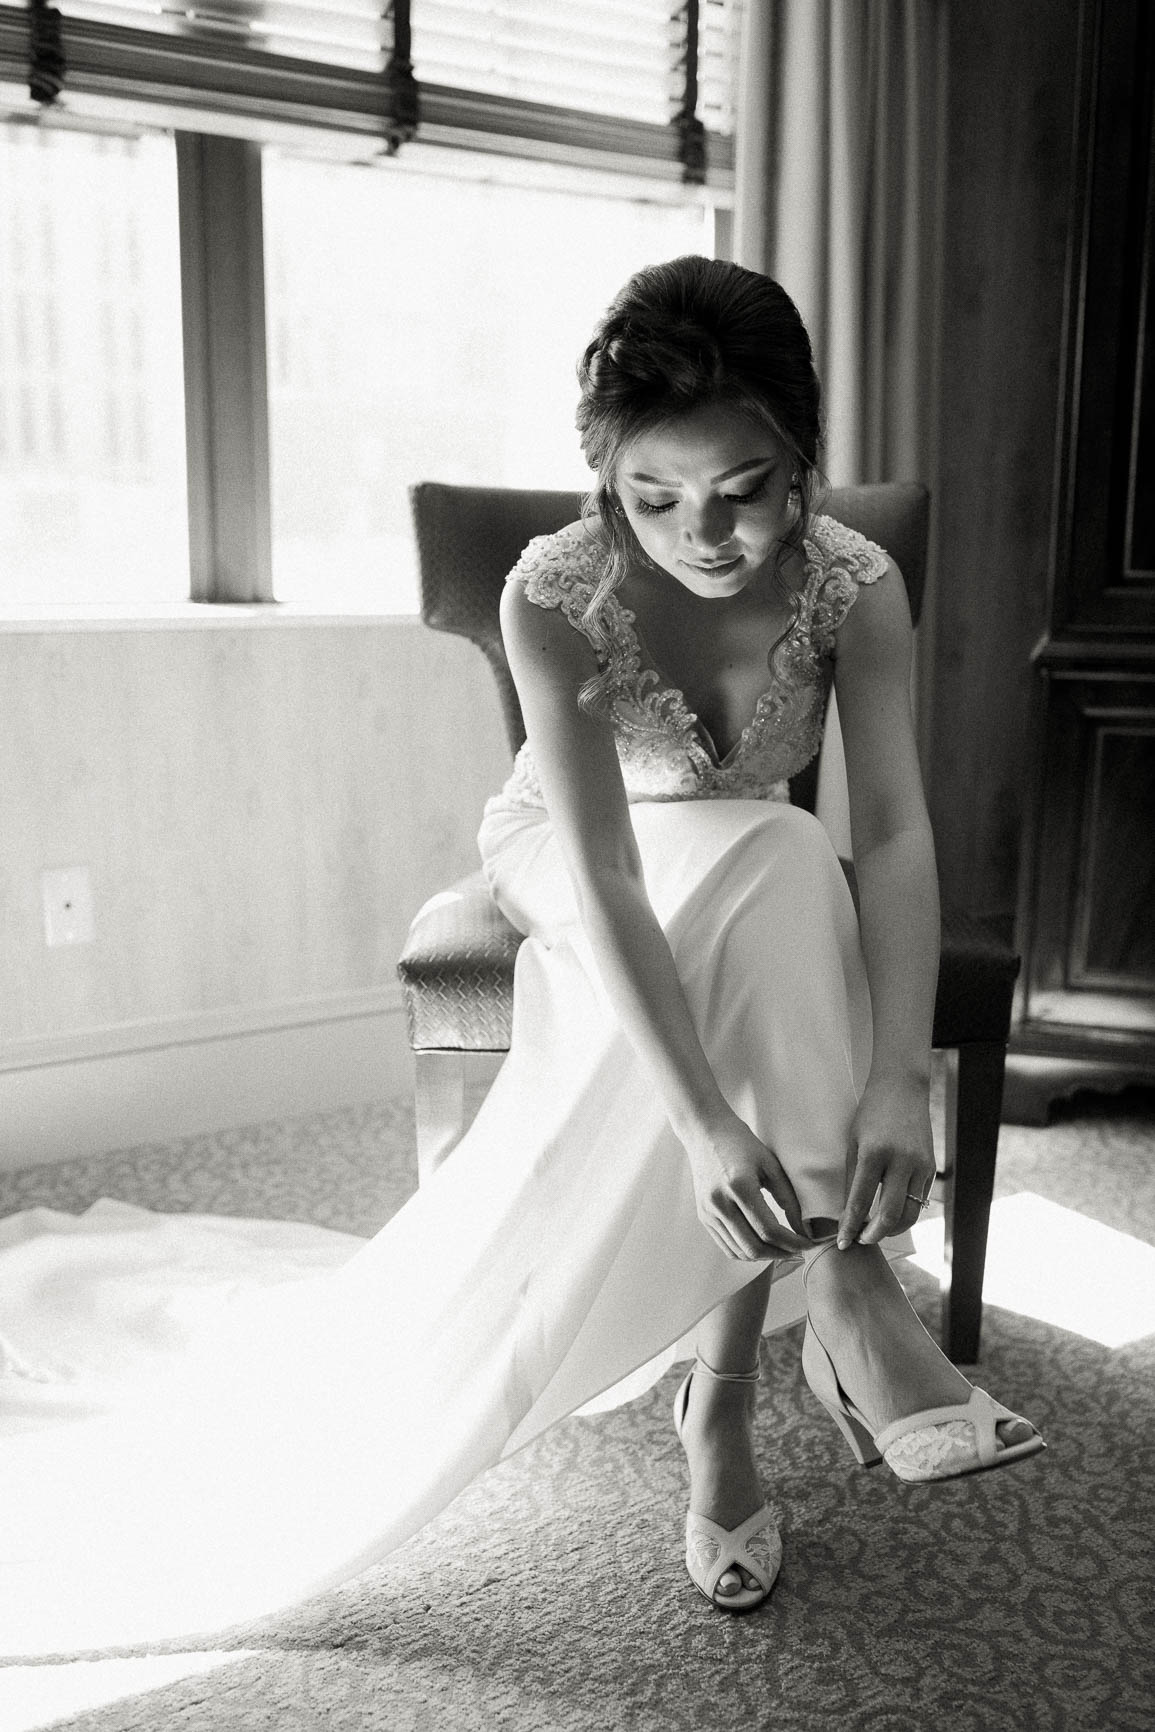 bride getting ready, wedding dress and shoes, dunhill hotel wedding photos, nhieu tang photography, charlotte nc wedding photographer, charlotte wedding photographer